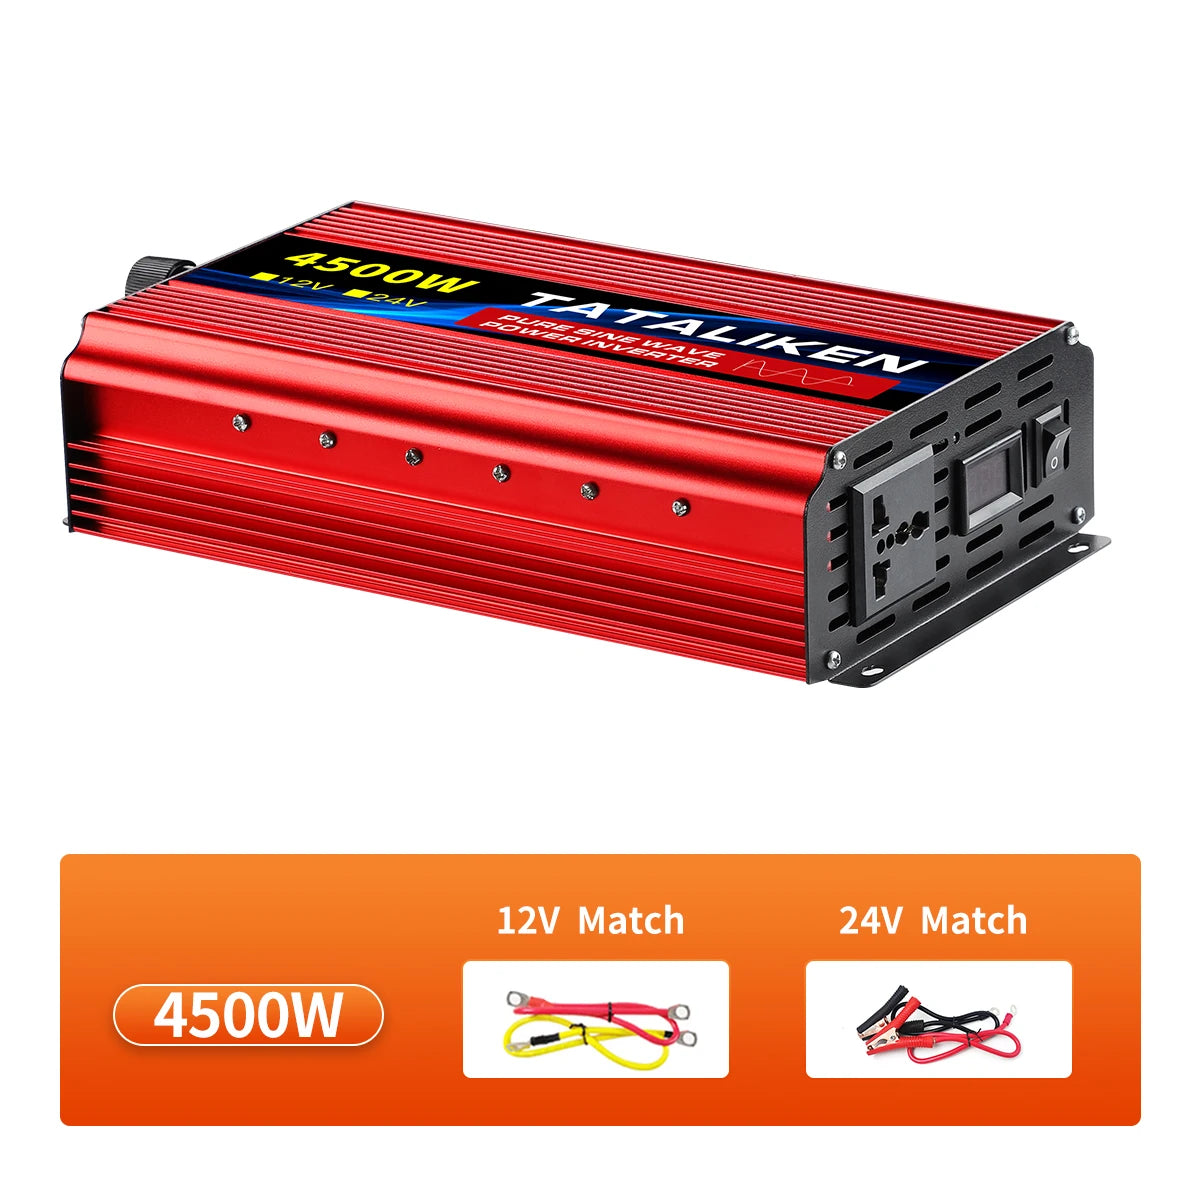 pure sine wave inverter, Universal power converter, 1500W, AC 220V output, from Mainland China.